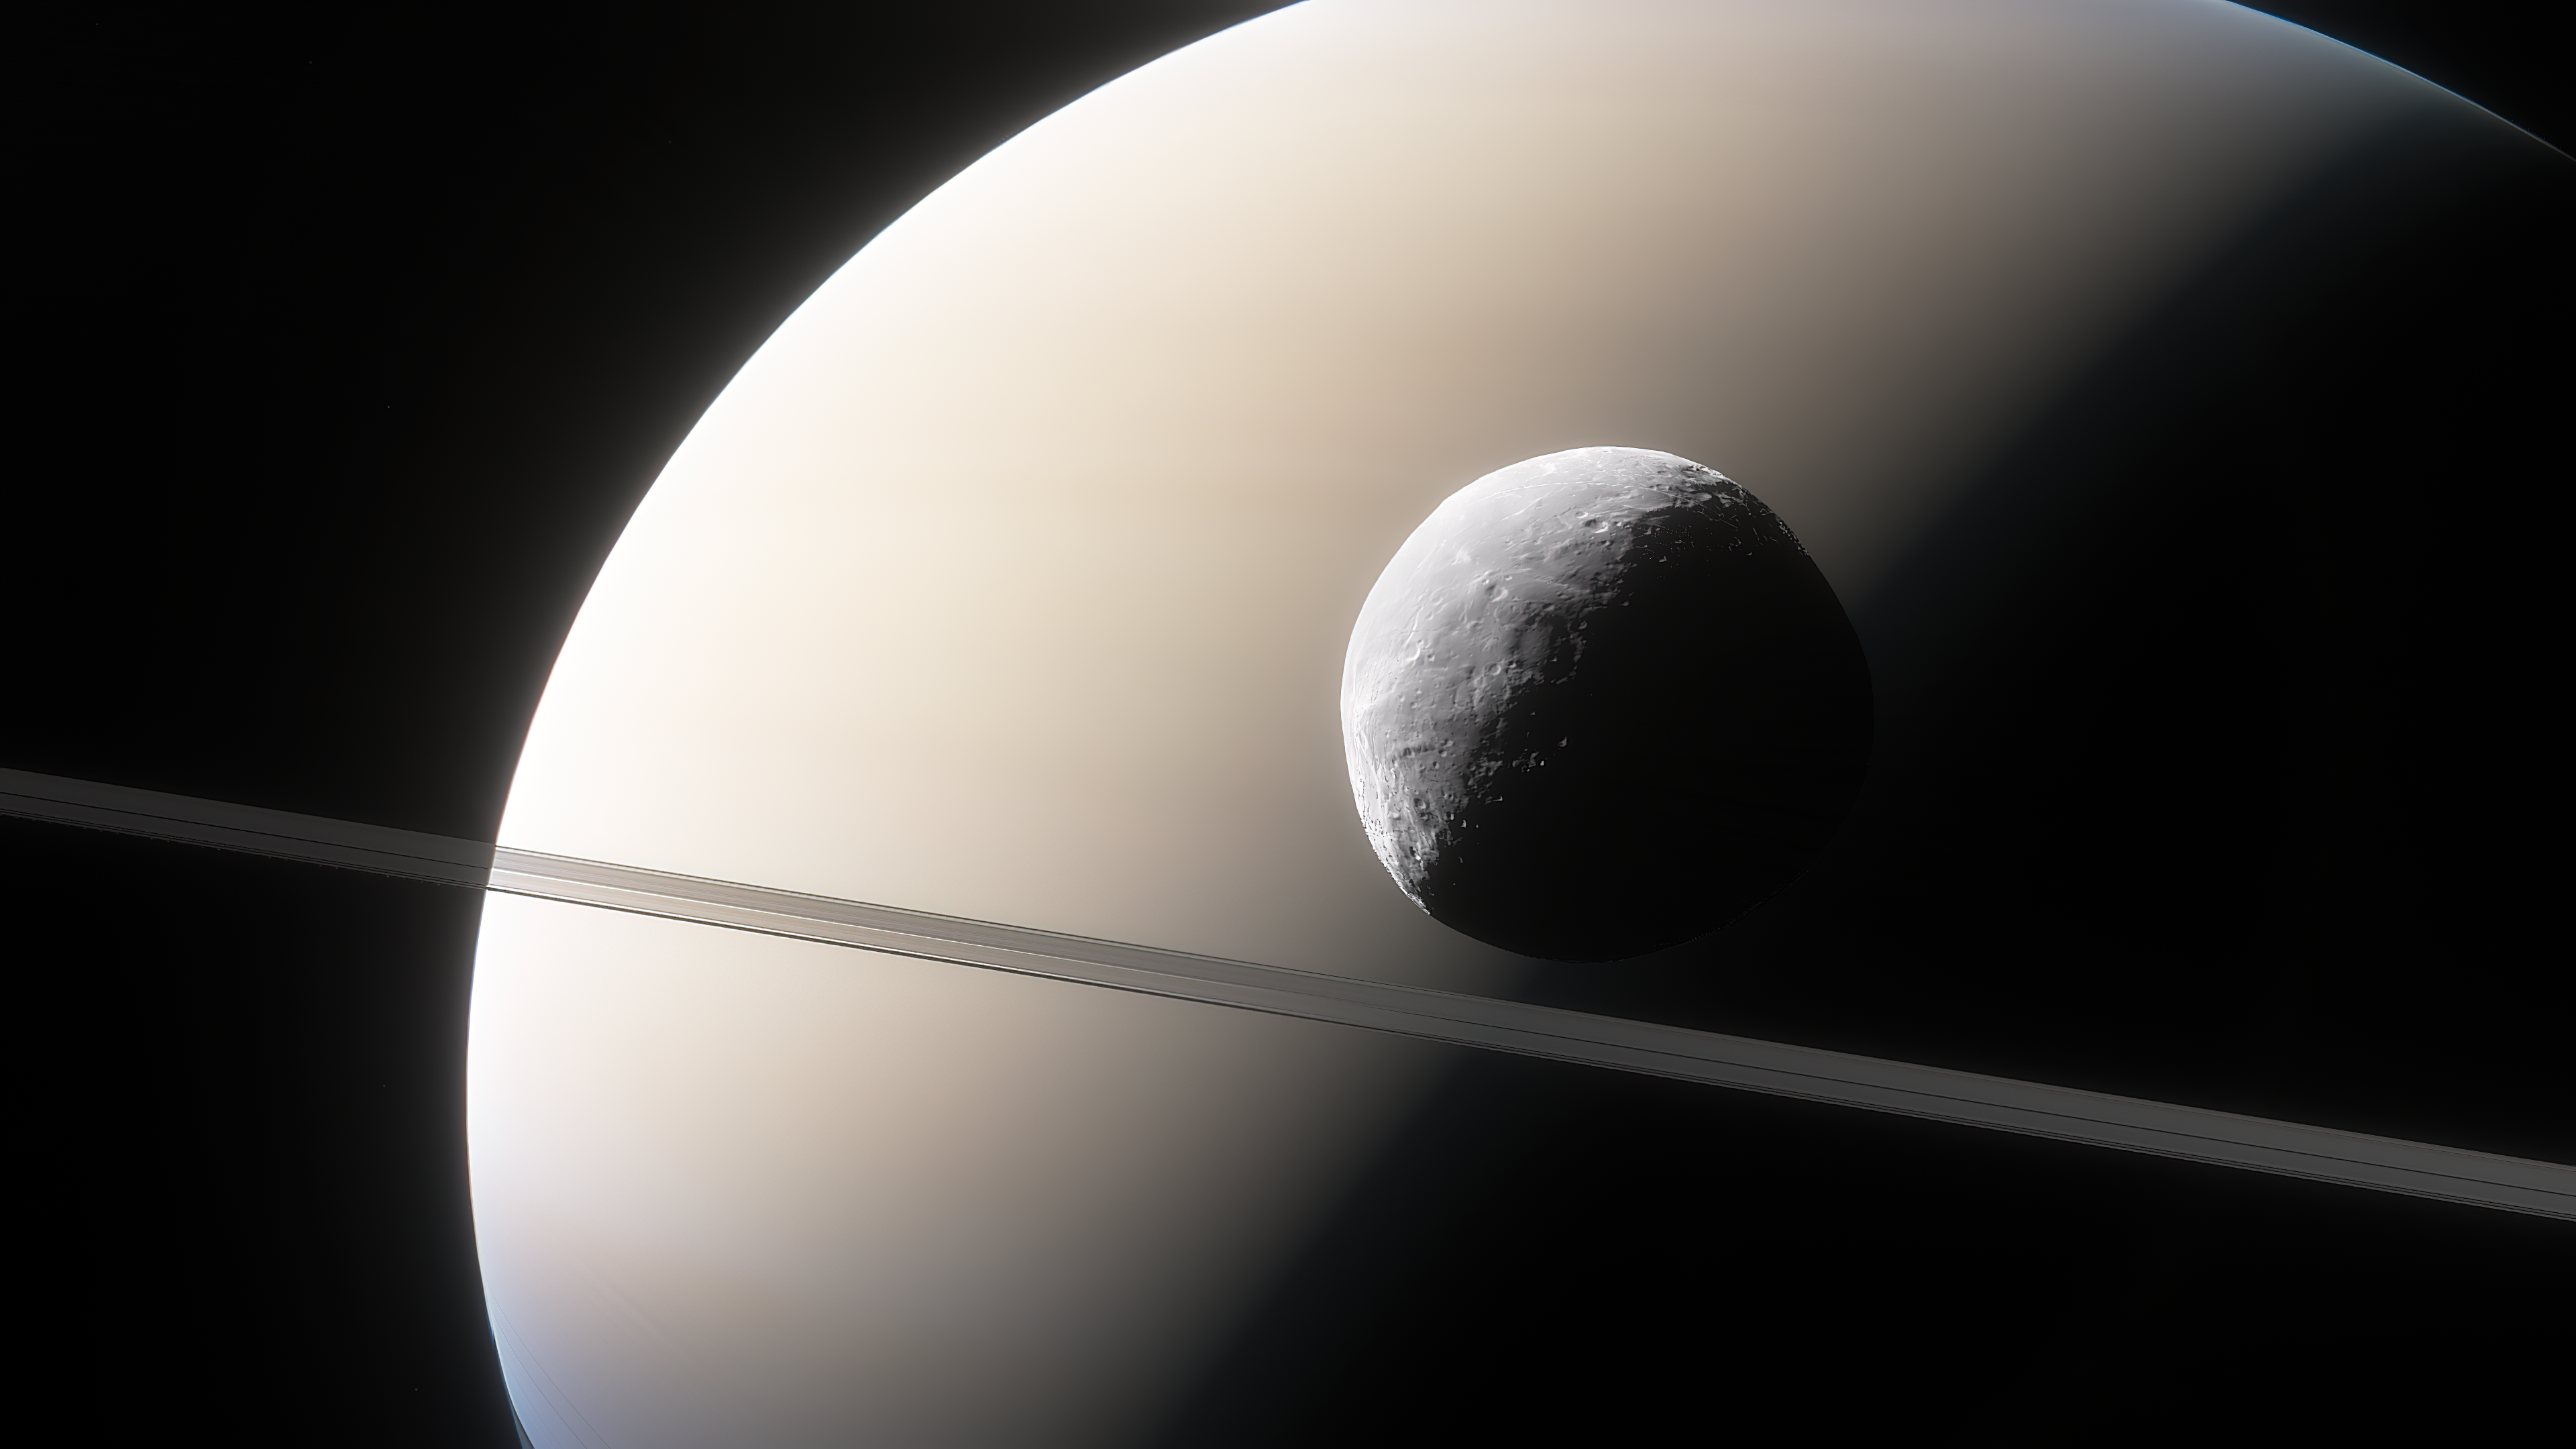 10+ Sci Fi Saturn HD Wallpapers and Backgrounds